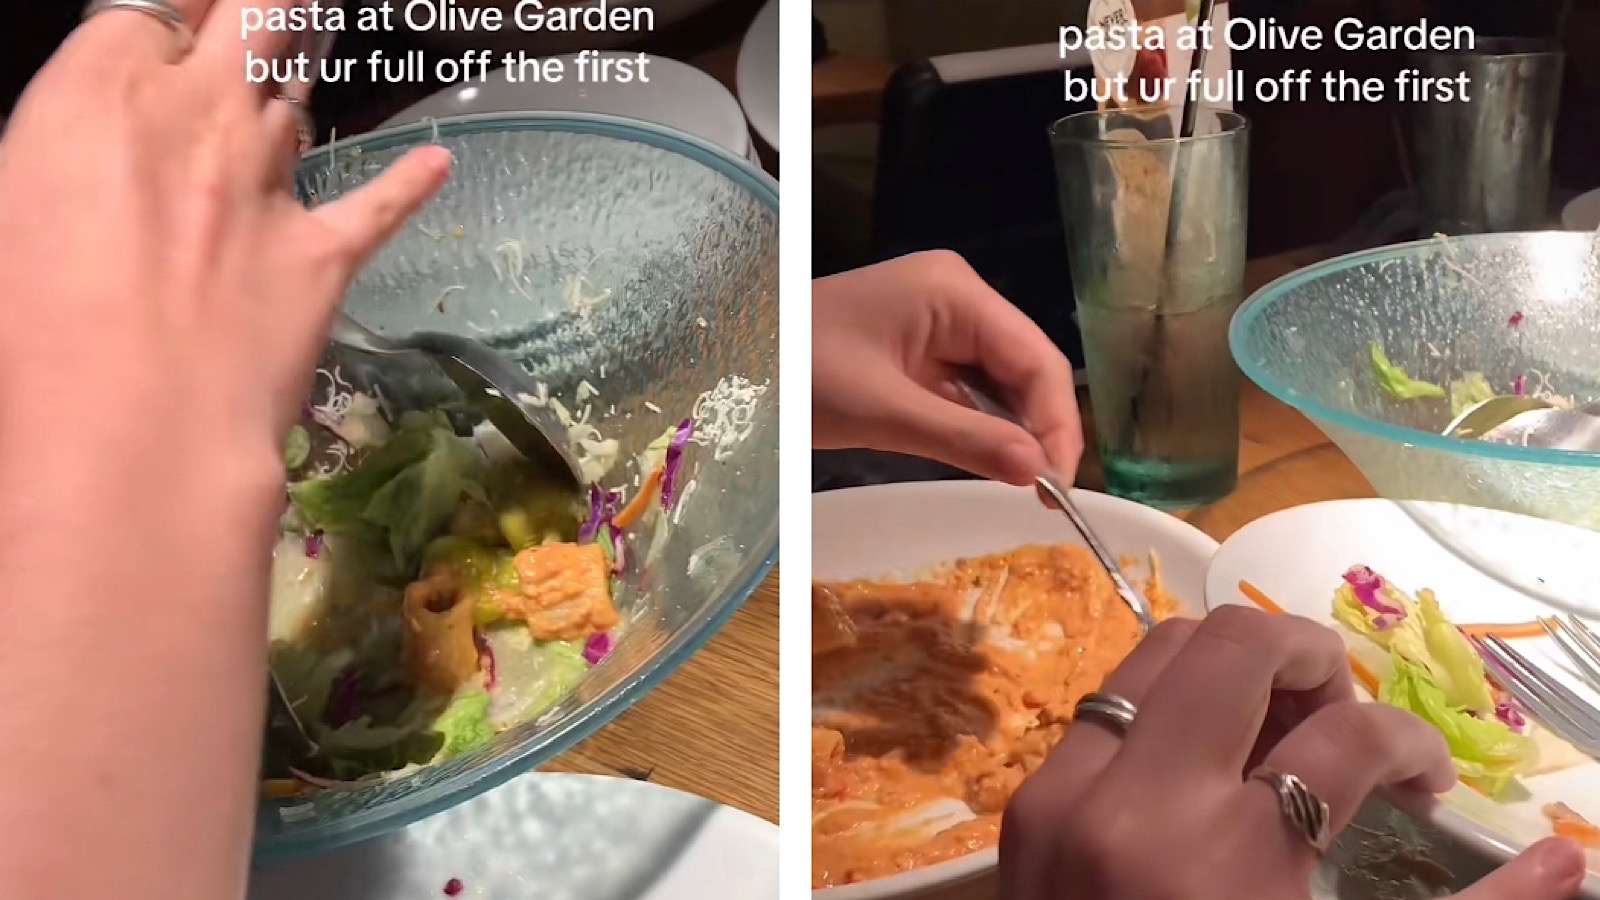 olive garden customer finds way to get more pasta before her first dish was done